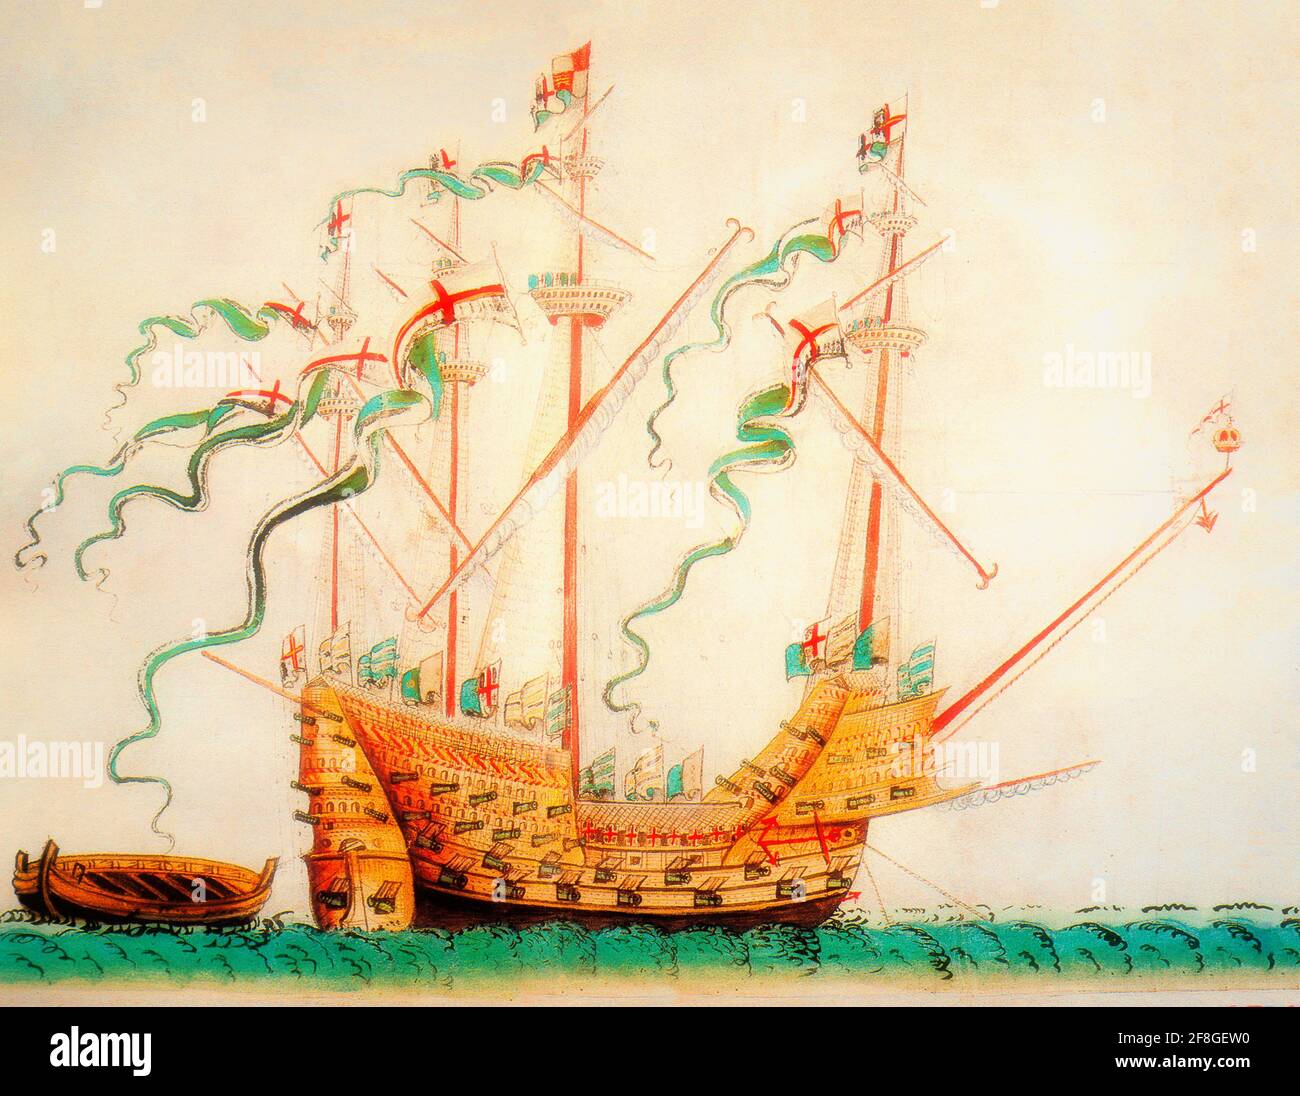 The Henry Grace à Dieu, aka Great Harry, an English carrack of the King's Fleet in the 16th century and in her day the largest warship in the world serving as Henry VIII's flagship. Illustration as depicted in the Anthony Roll, a written record of ships of the English Tudor navy of the 1540s, named after its creator, Anthony Anthony. NB This colour version has been digitally corrected to remove page folds, (most of the) blemishes and imperfections. Stock Photo